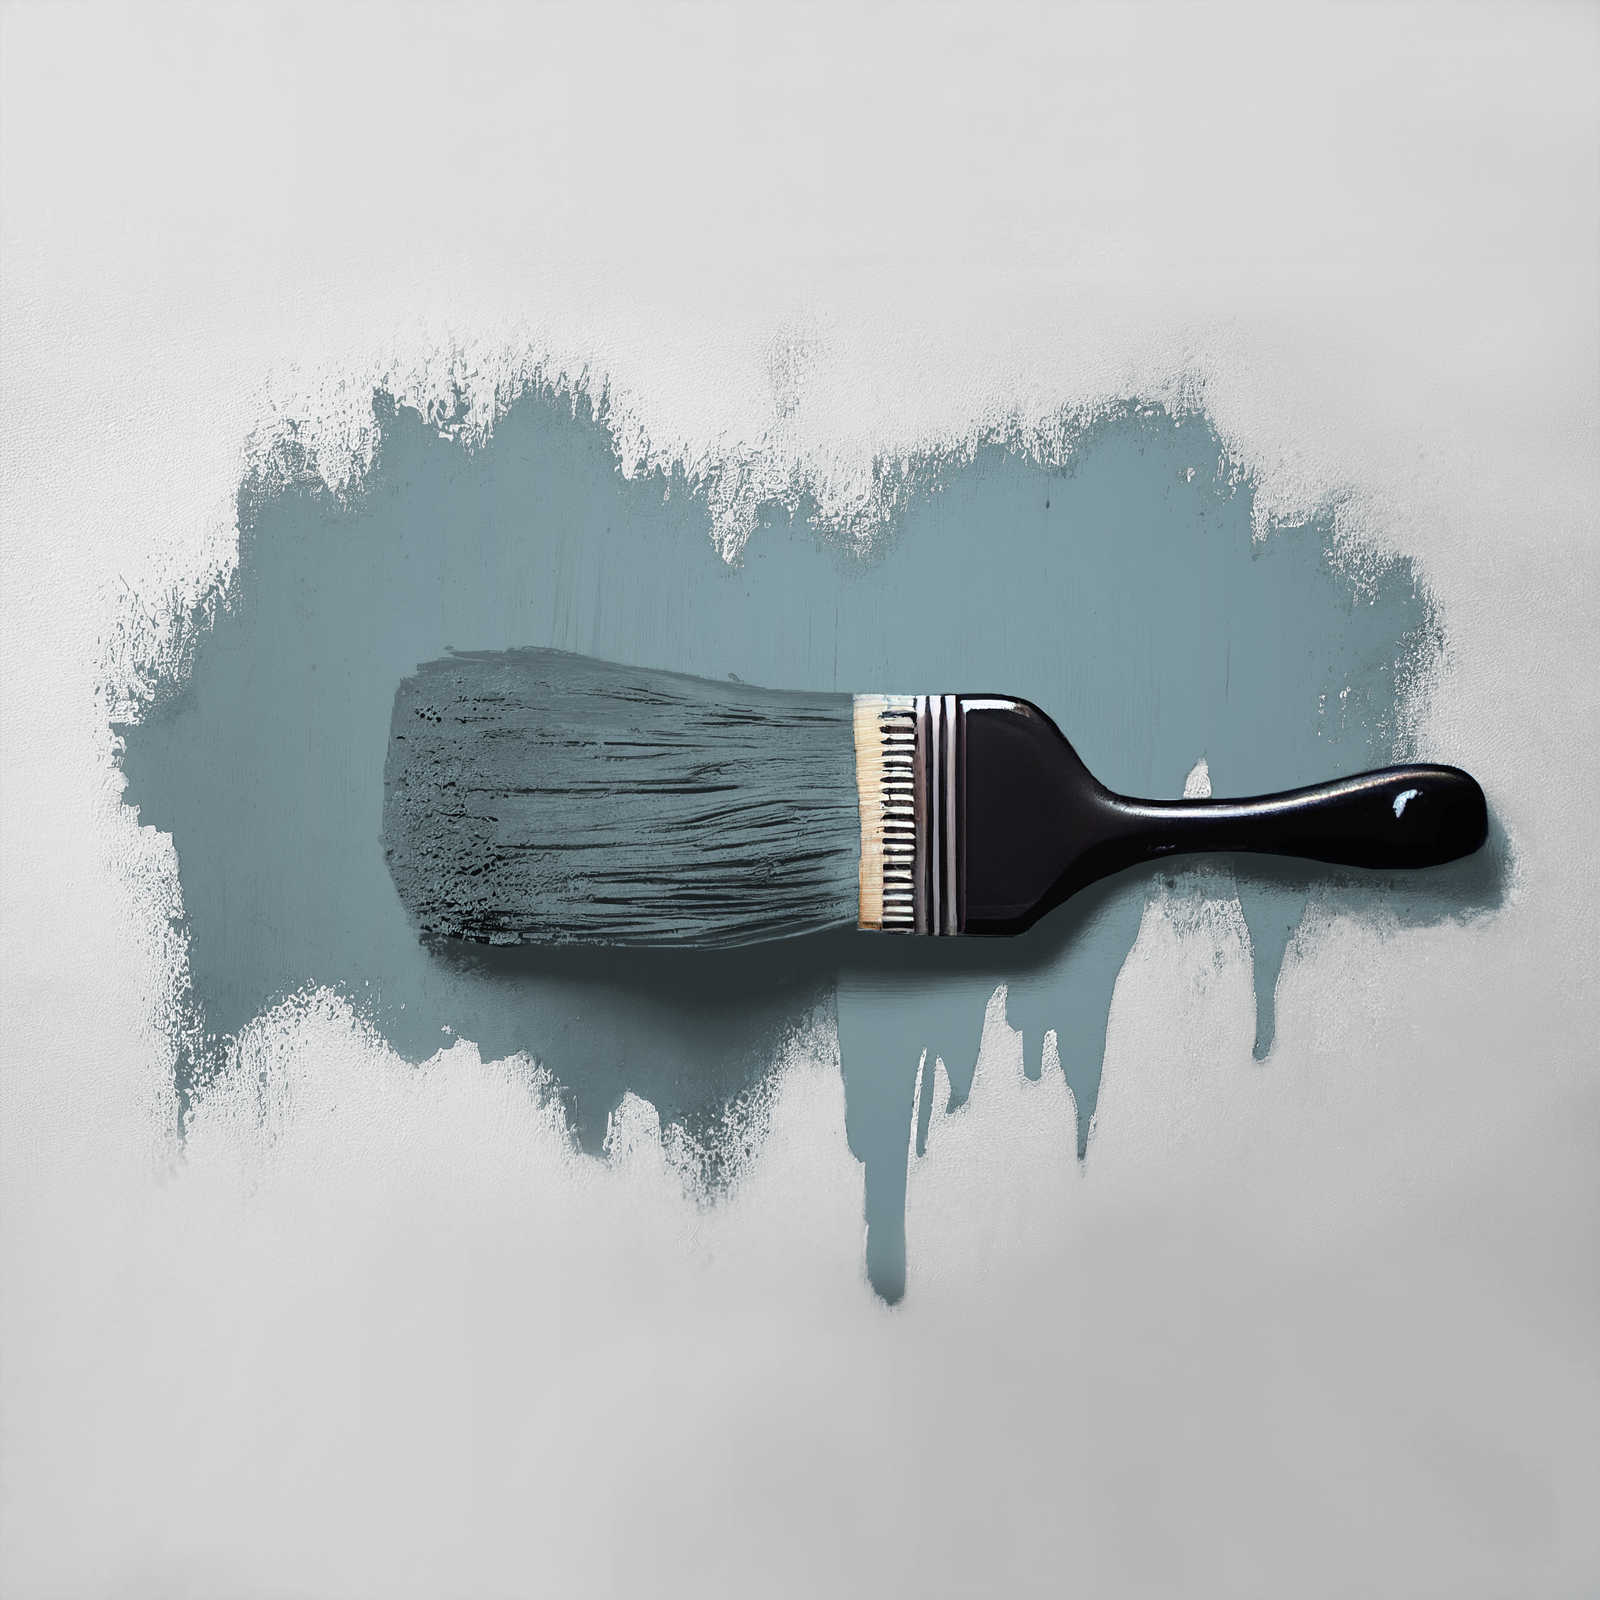             Wall Paint TCK3010 »Typical Trout« in light blue-grey – 2.5 litre
        